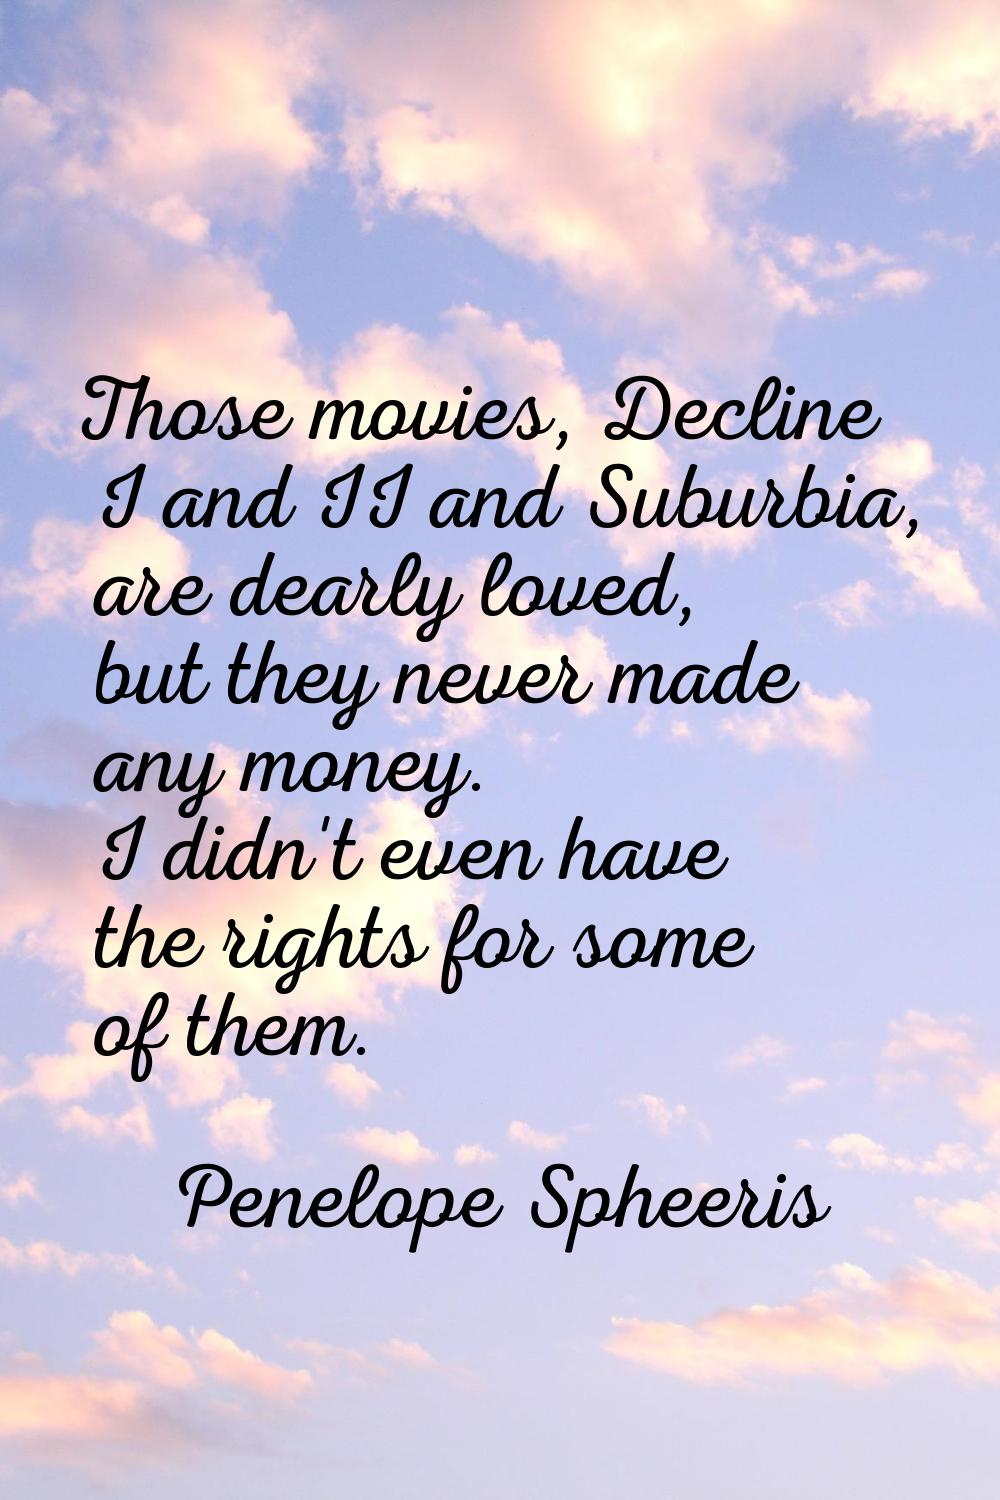 Those movies, Decline I and II and Suburbia, are dearly loved, but they never made any money. I did